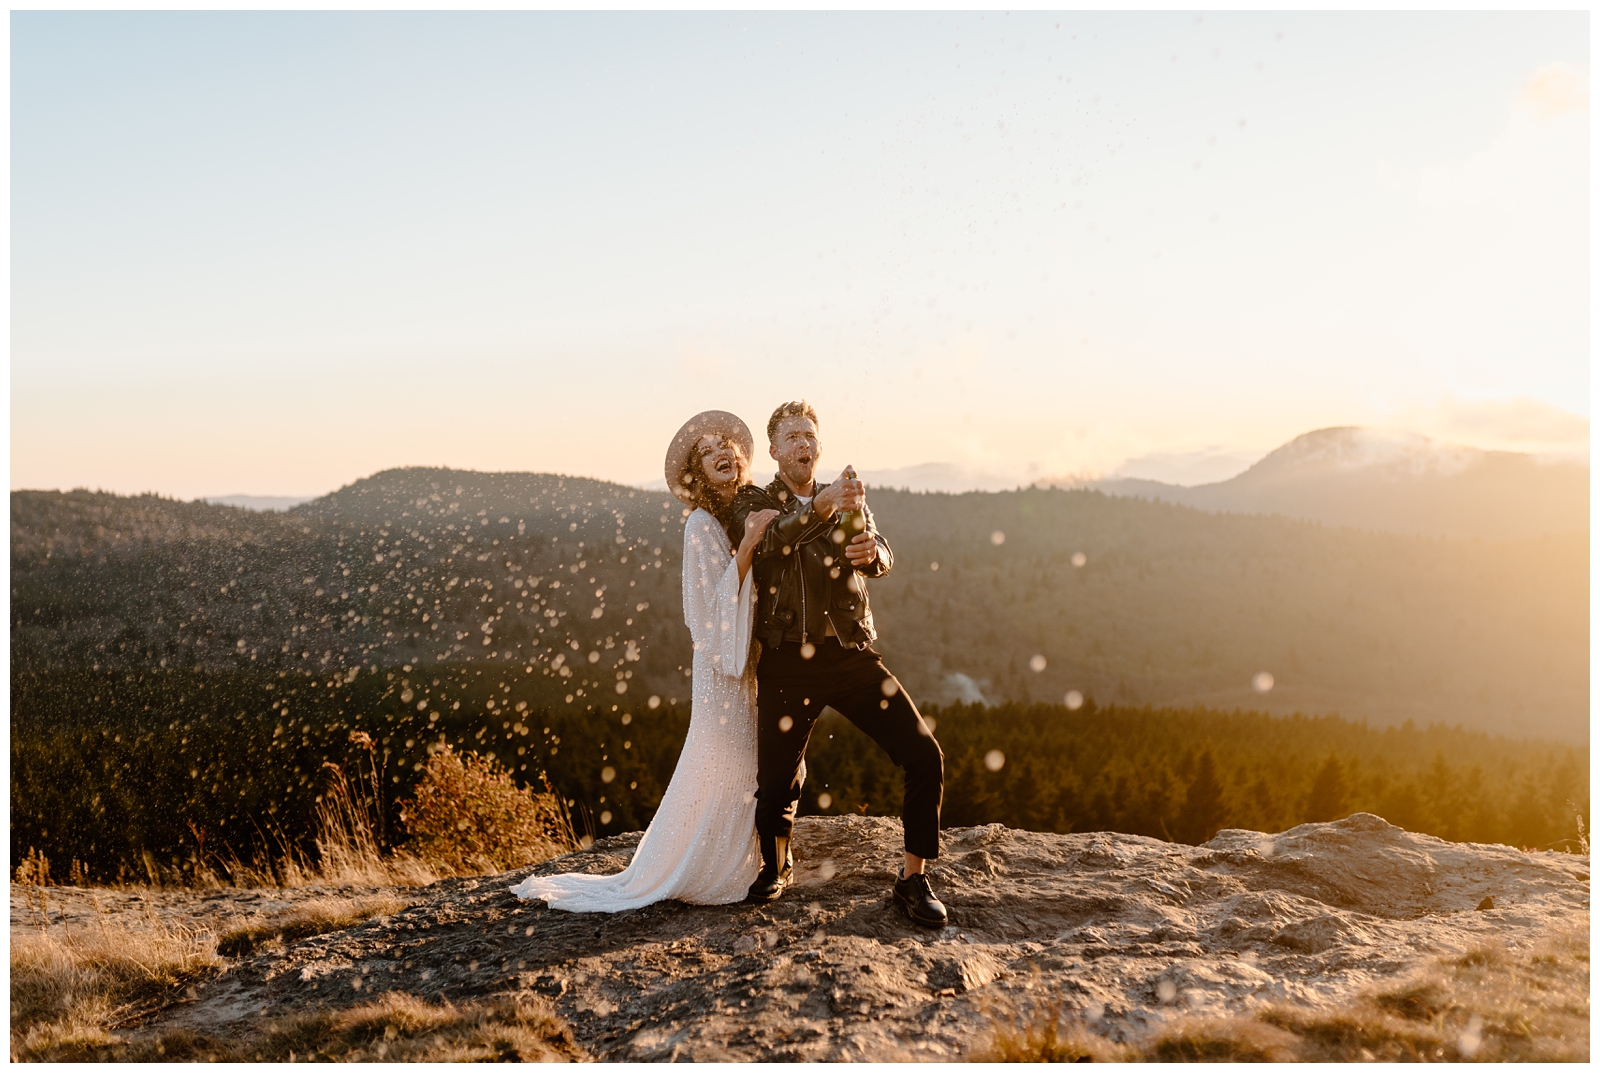 Learn how an elopement can save you money and still have an amazing day